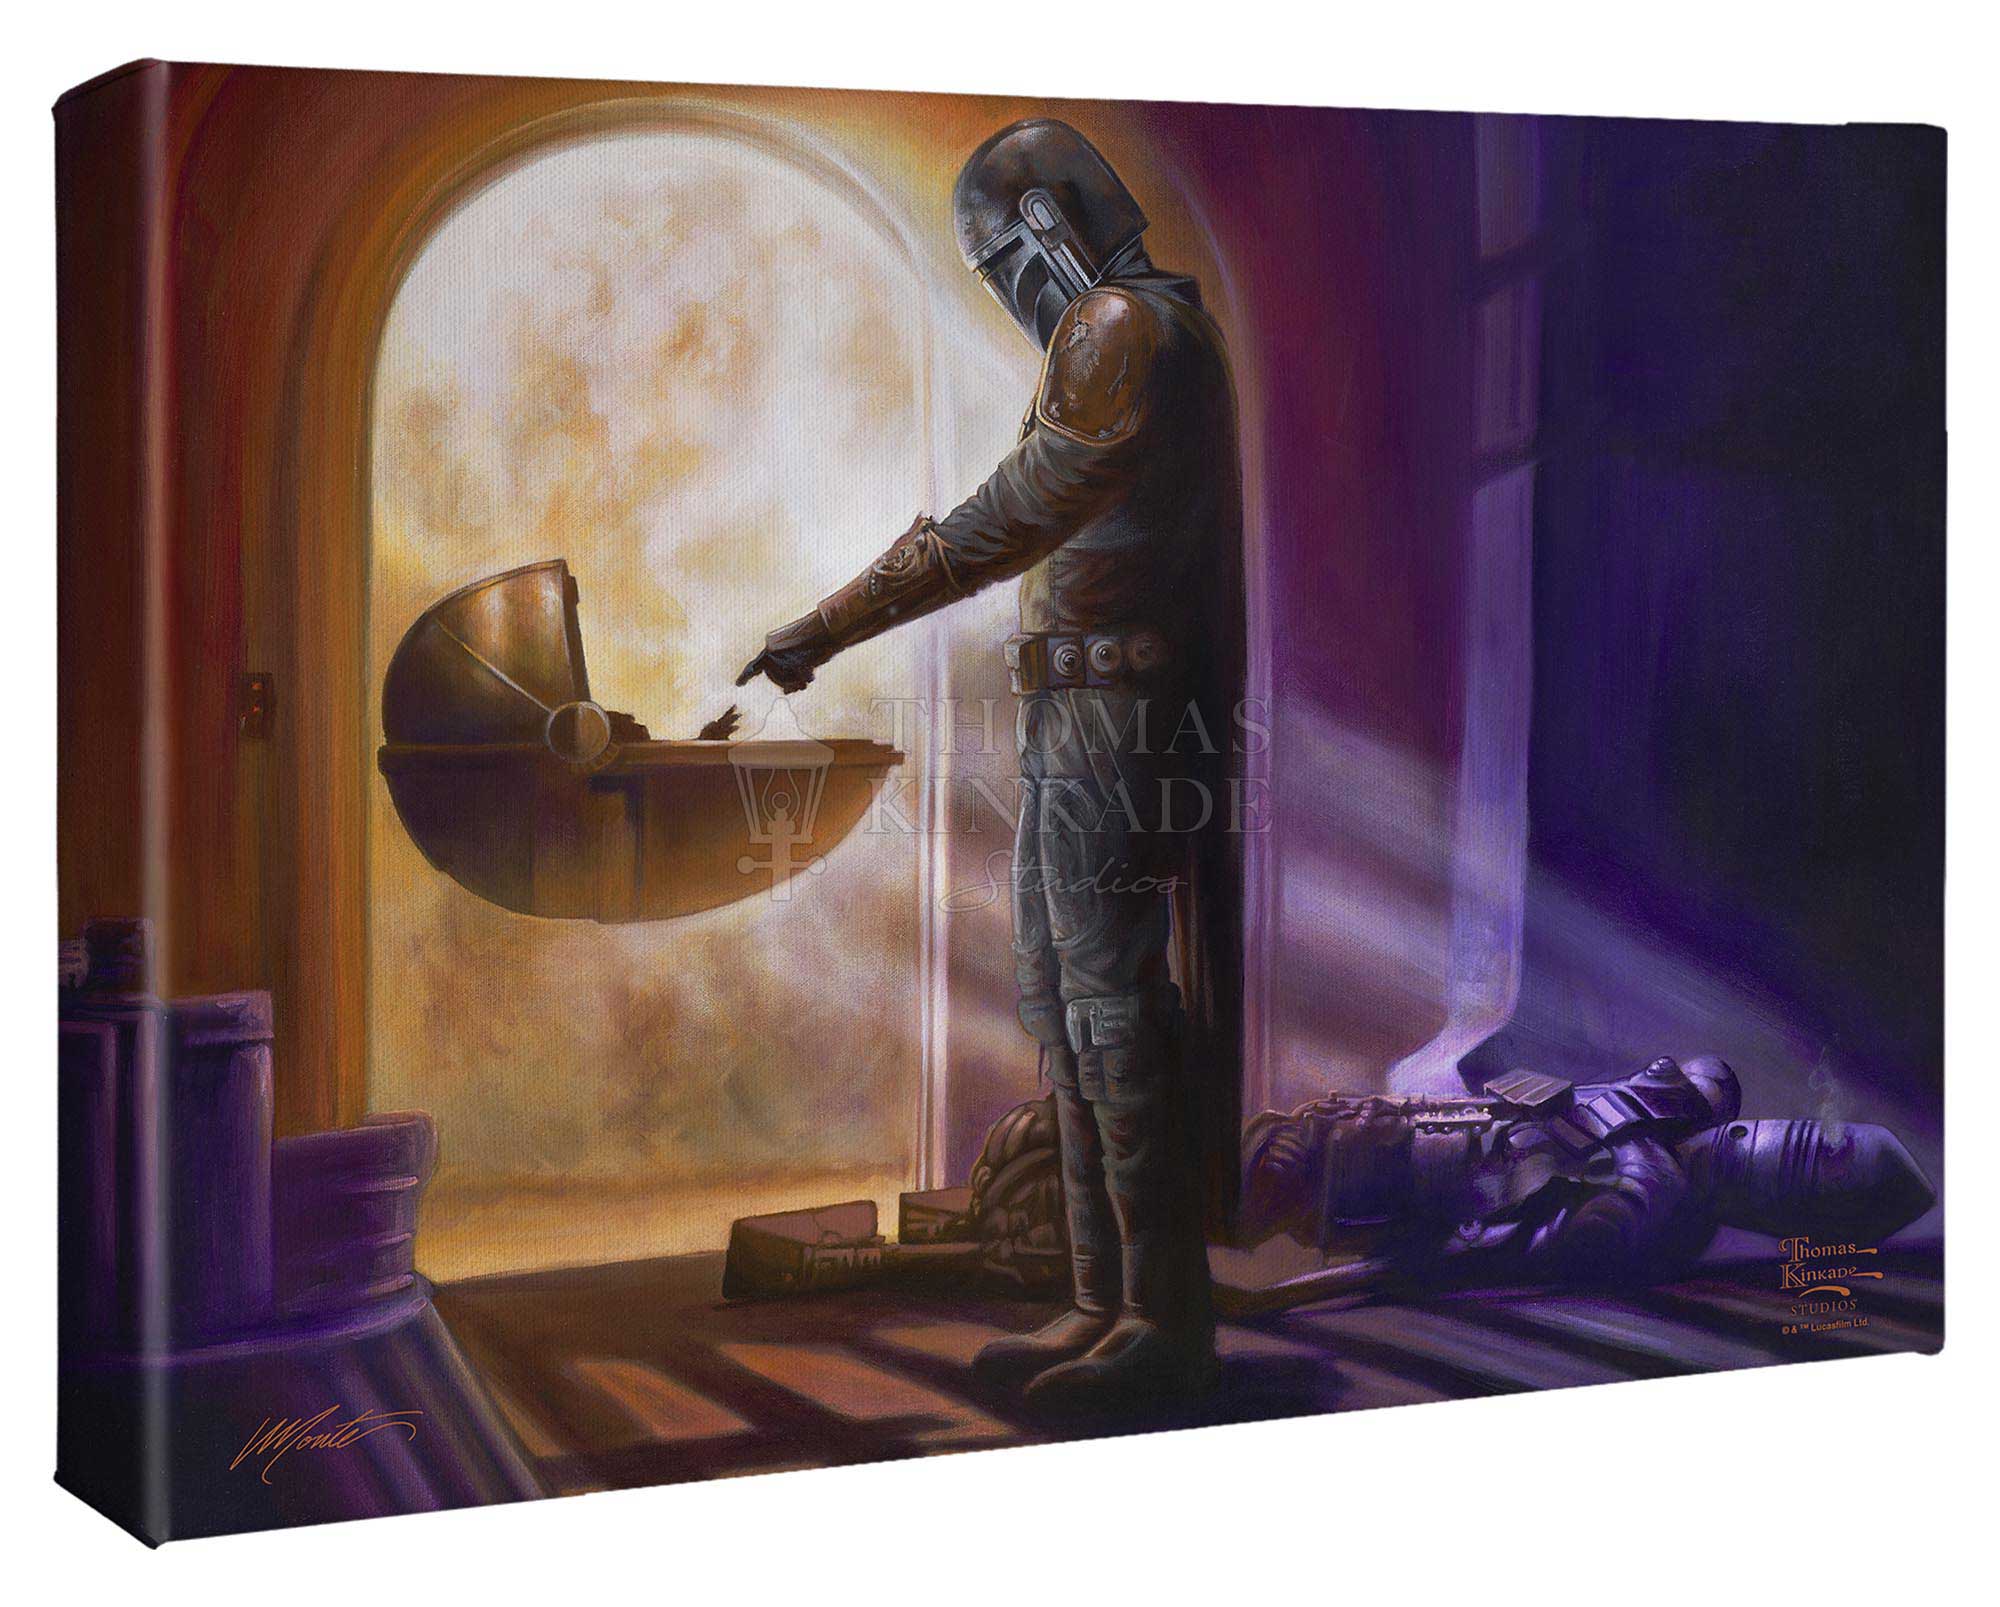 The Mandalorian - Turning Point - Wrapped Canvas